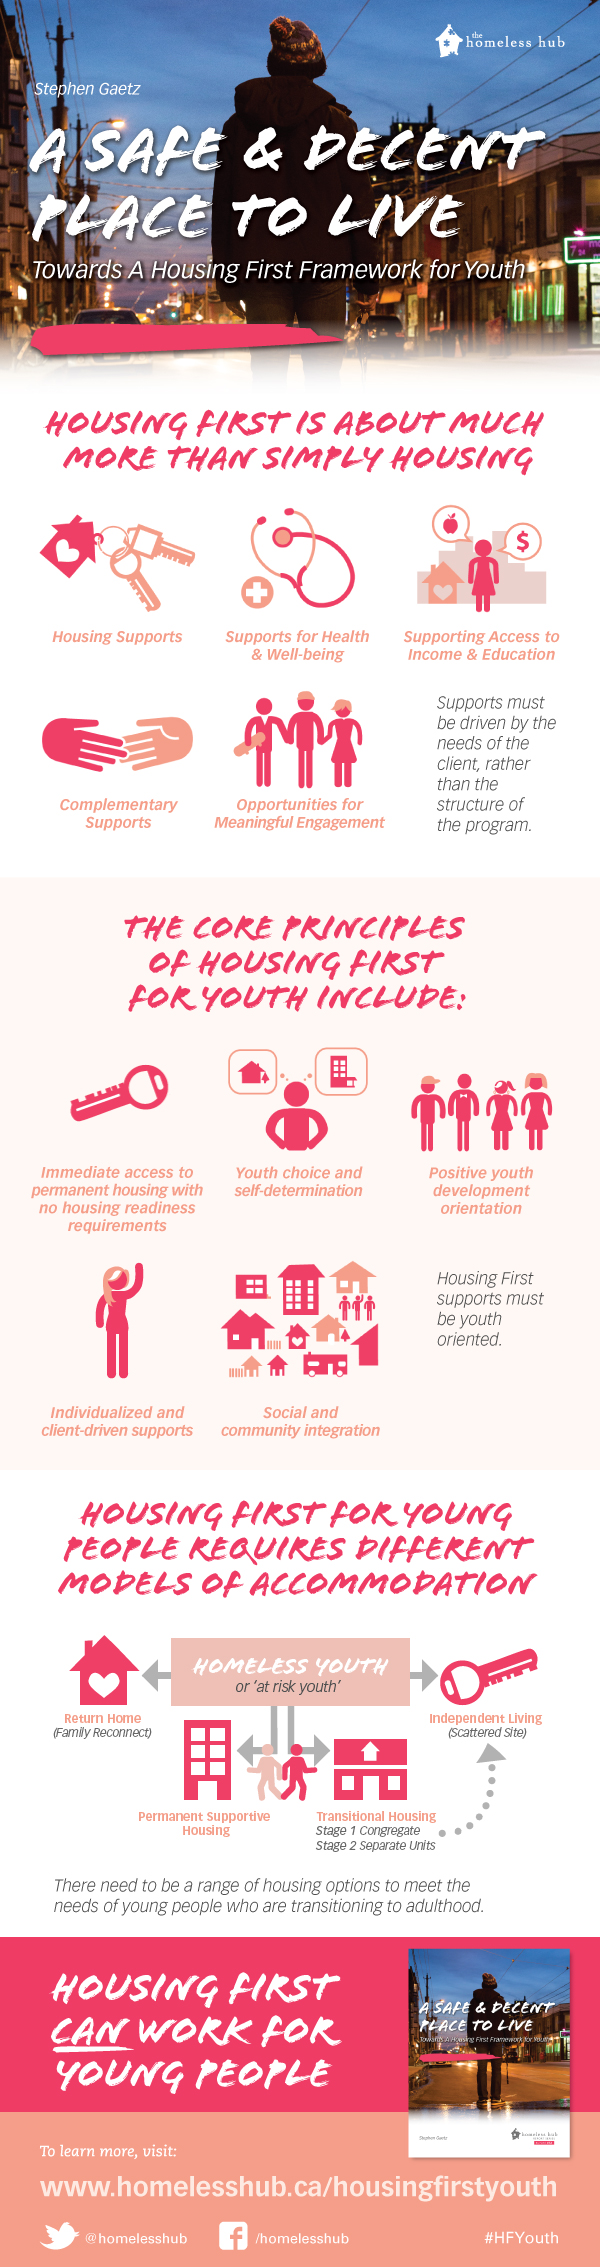 A Safe and Decent Place to Live: Towards a Housing First Framework for Youth infographic